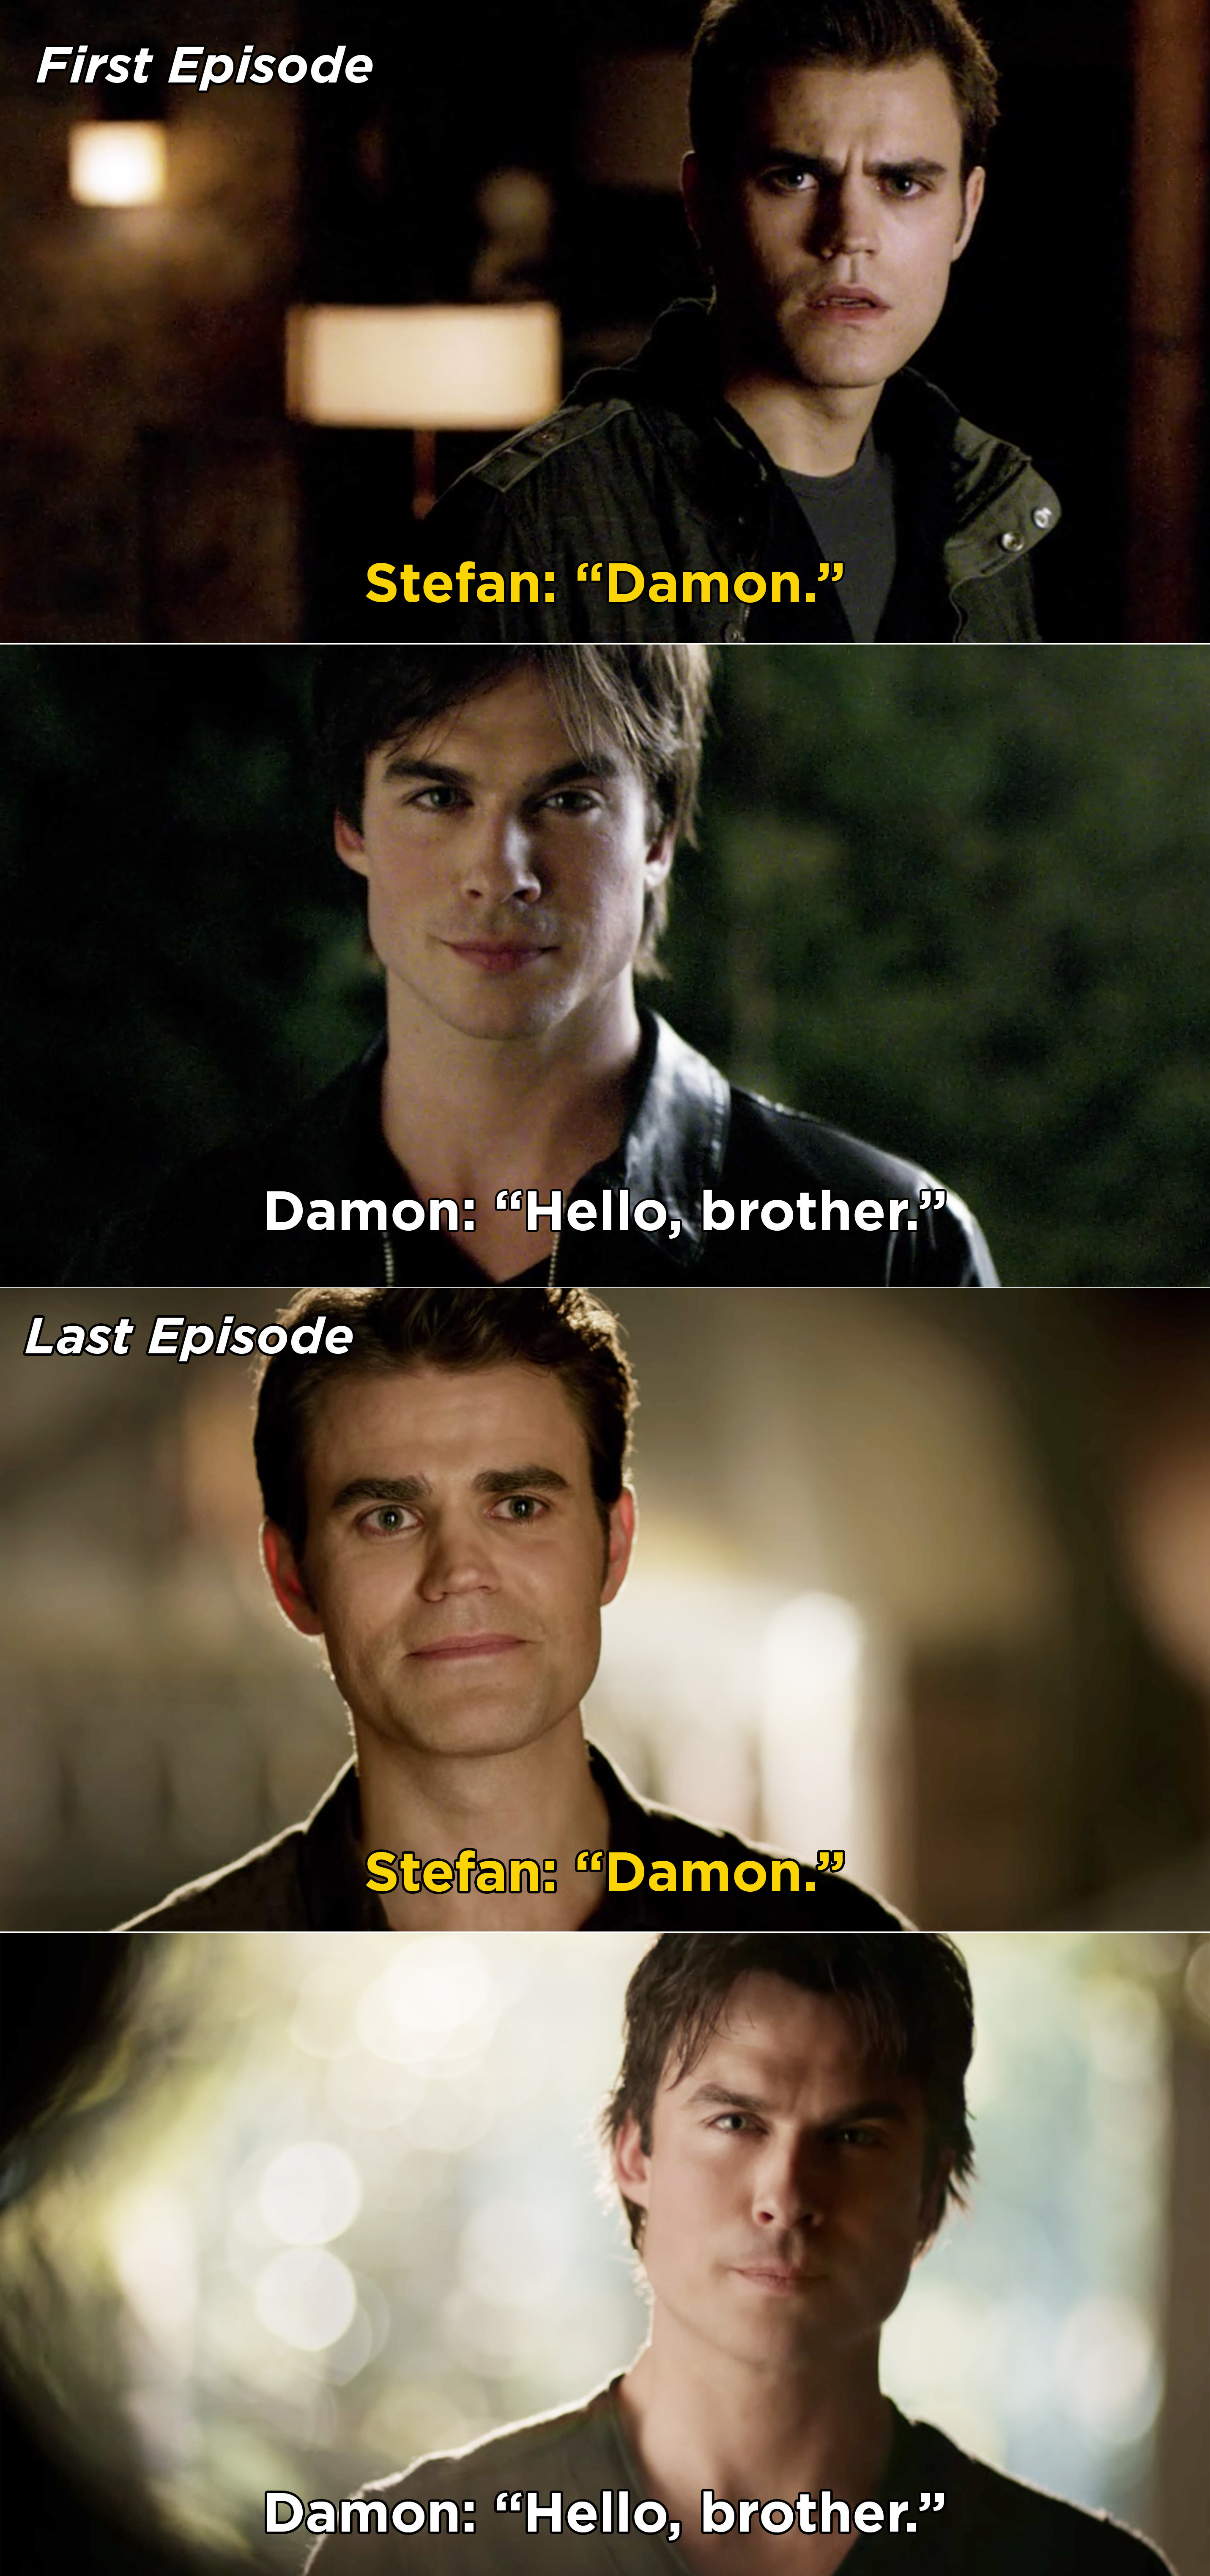 Damon saying &quot;Hello, brother&quot; to Stefan in the first episode and the last